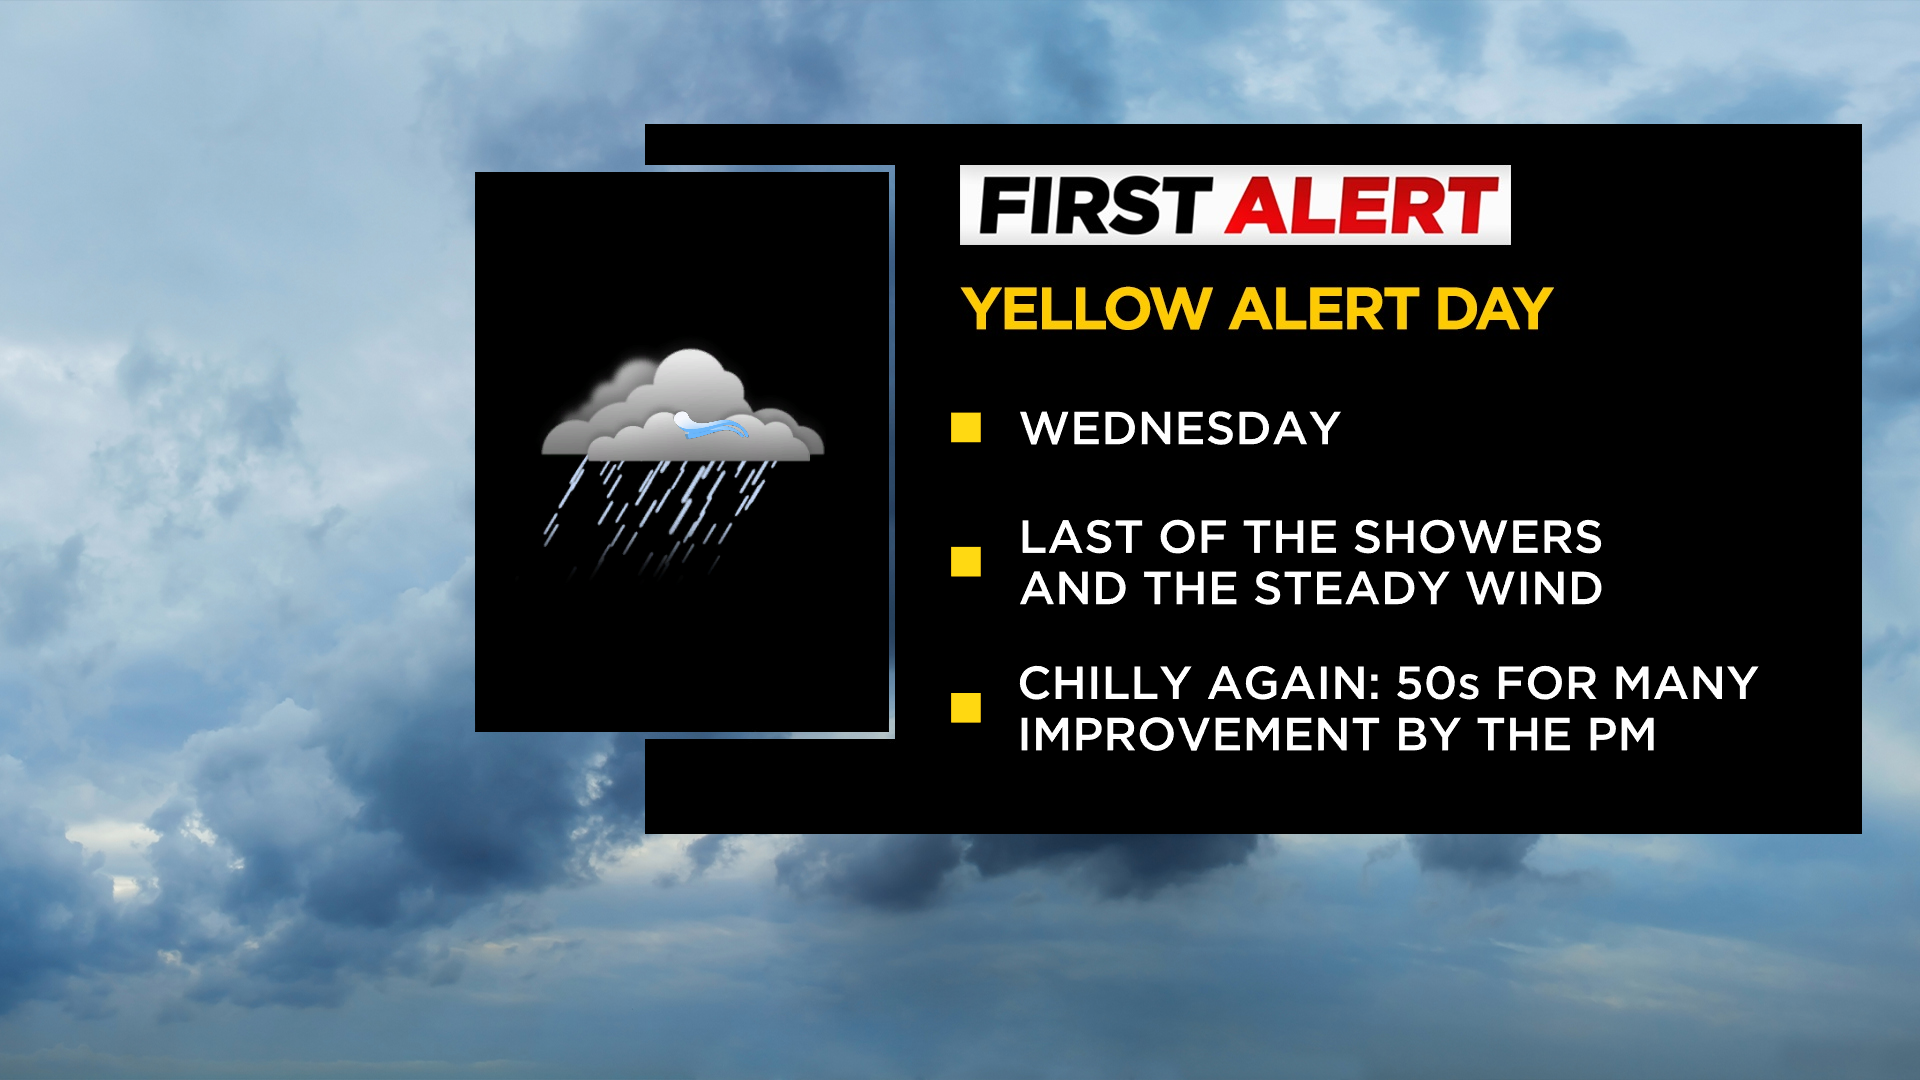 First Alert New York Yellow Alert day for Wednesday due to last of the showers and the steady wind, plus chilly again. 